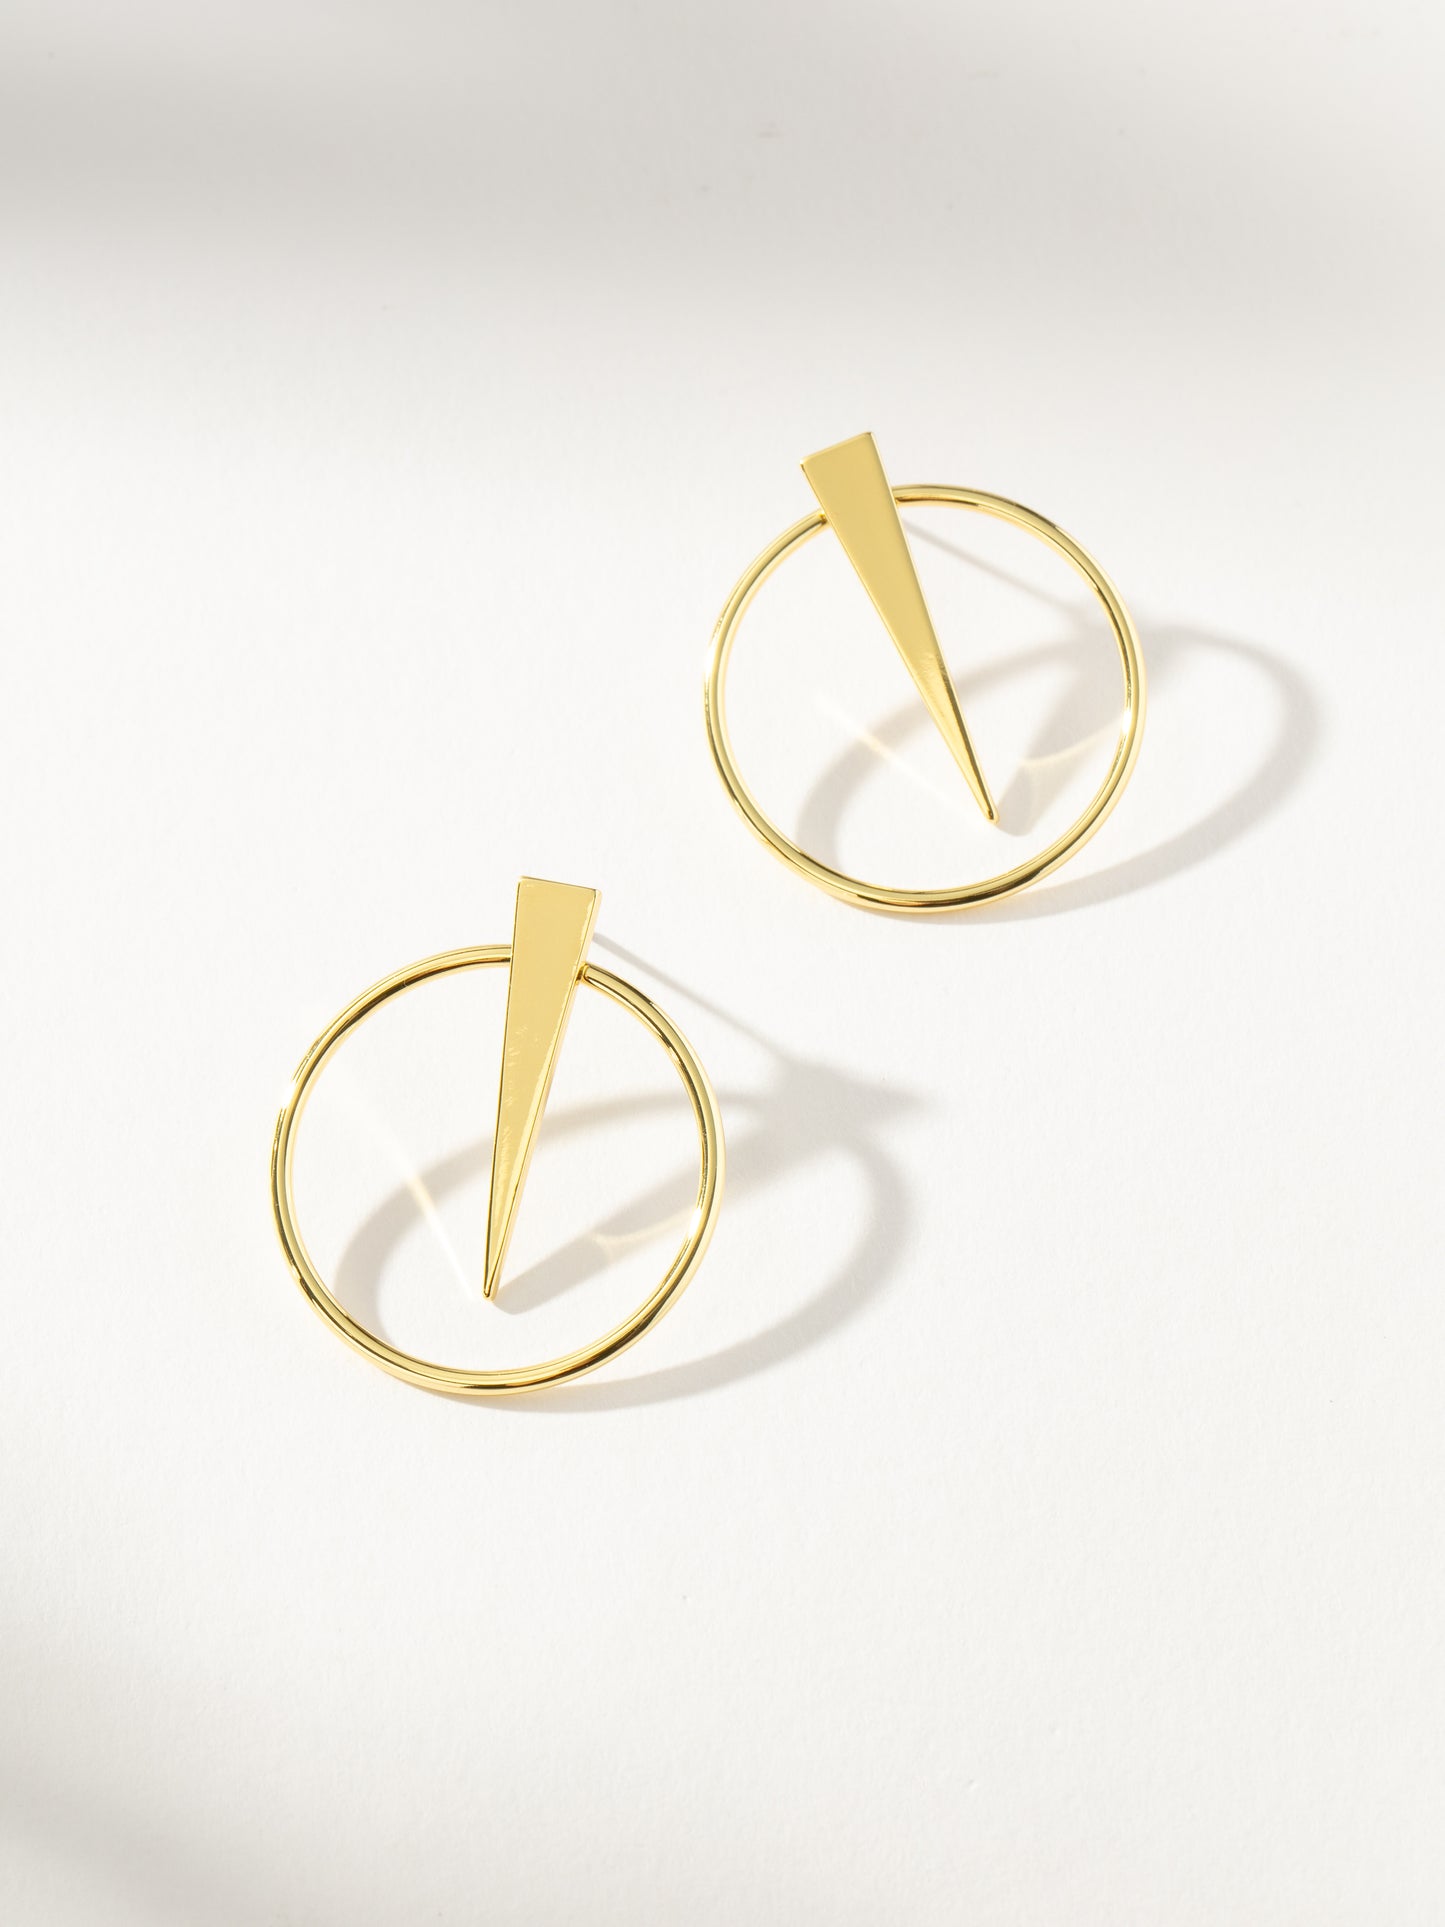 Shot in the Dark Earrings | Gold | Product Image | Uncommon James